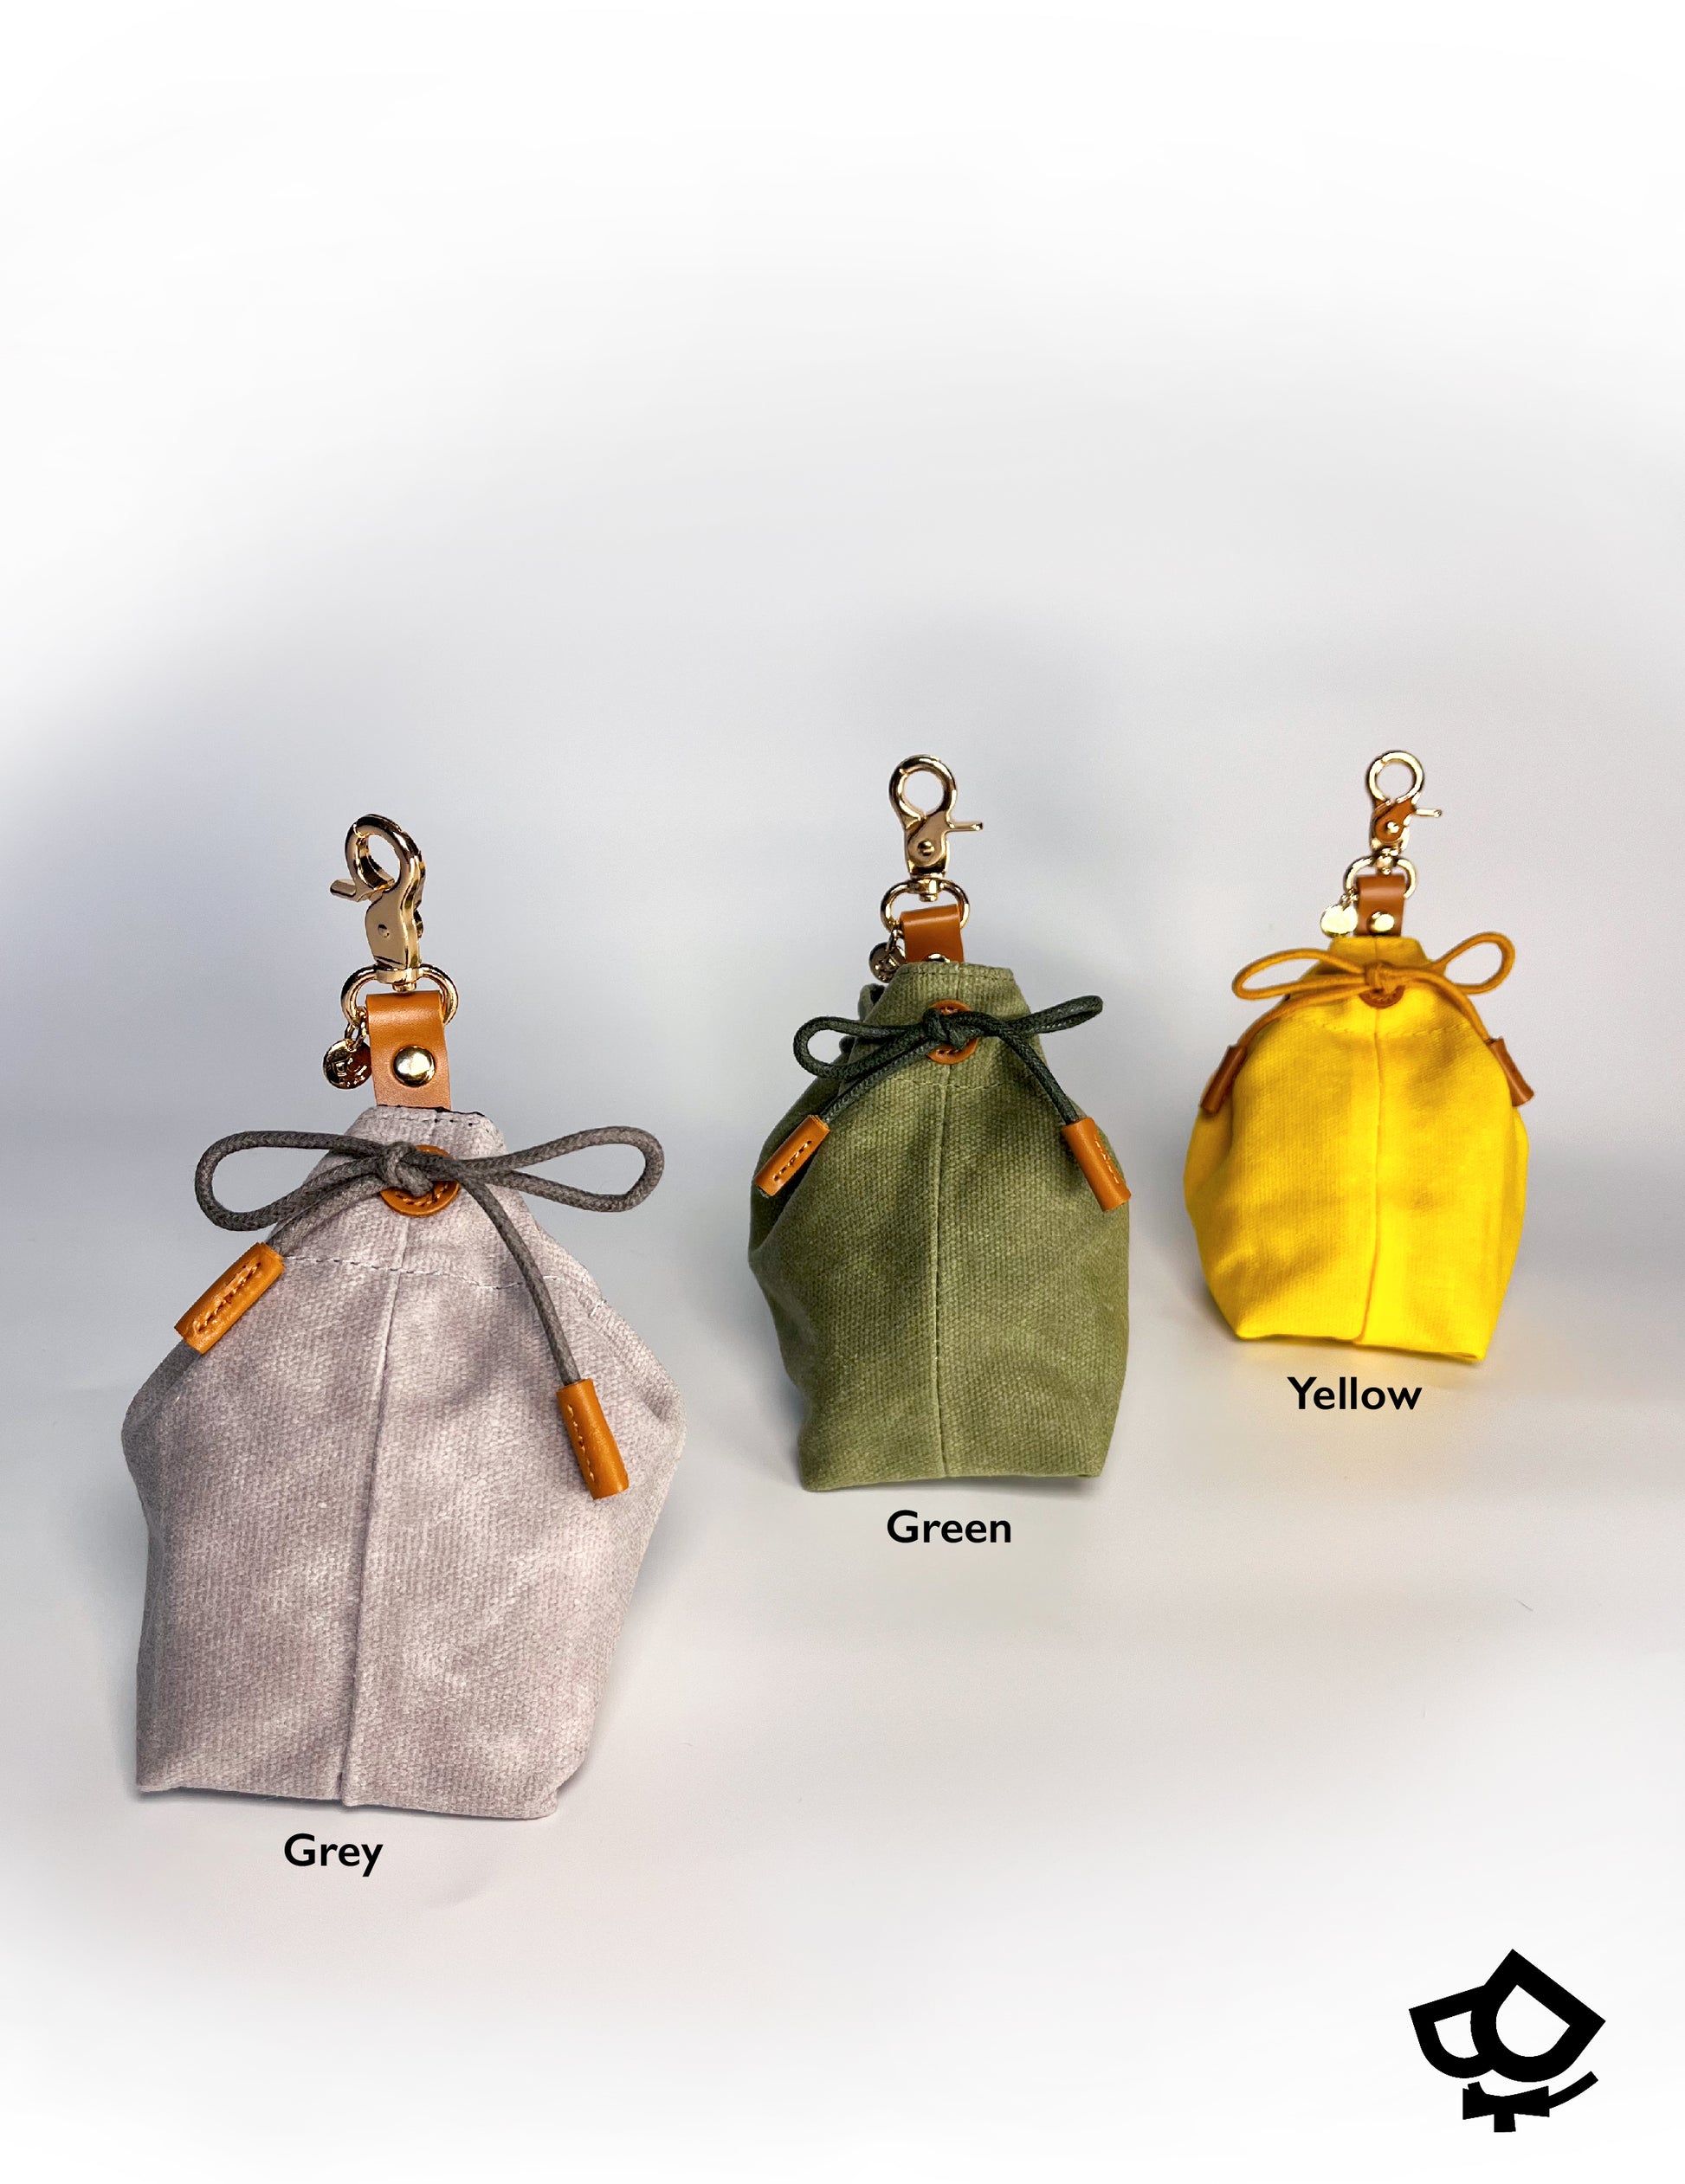 Dashing Dogs: The Dog Purse Collection